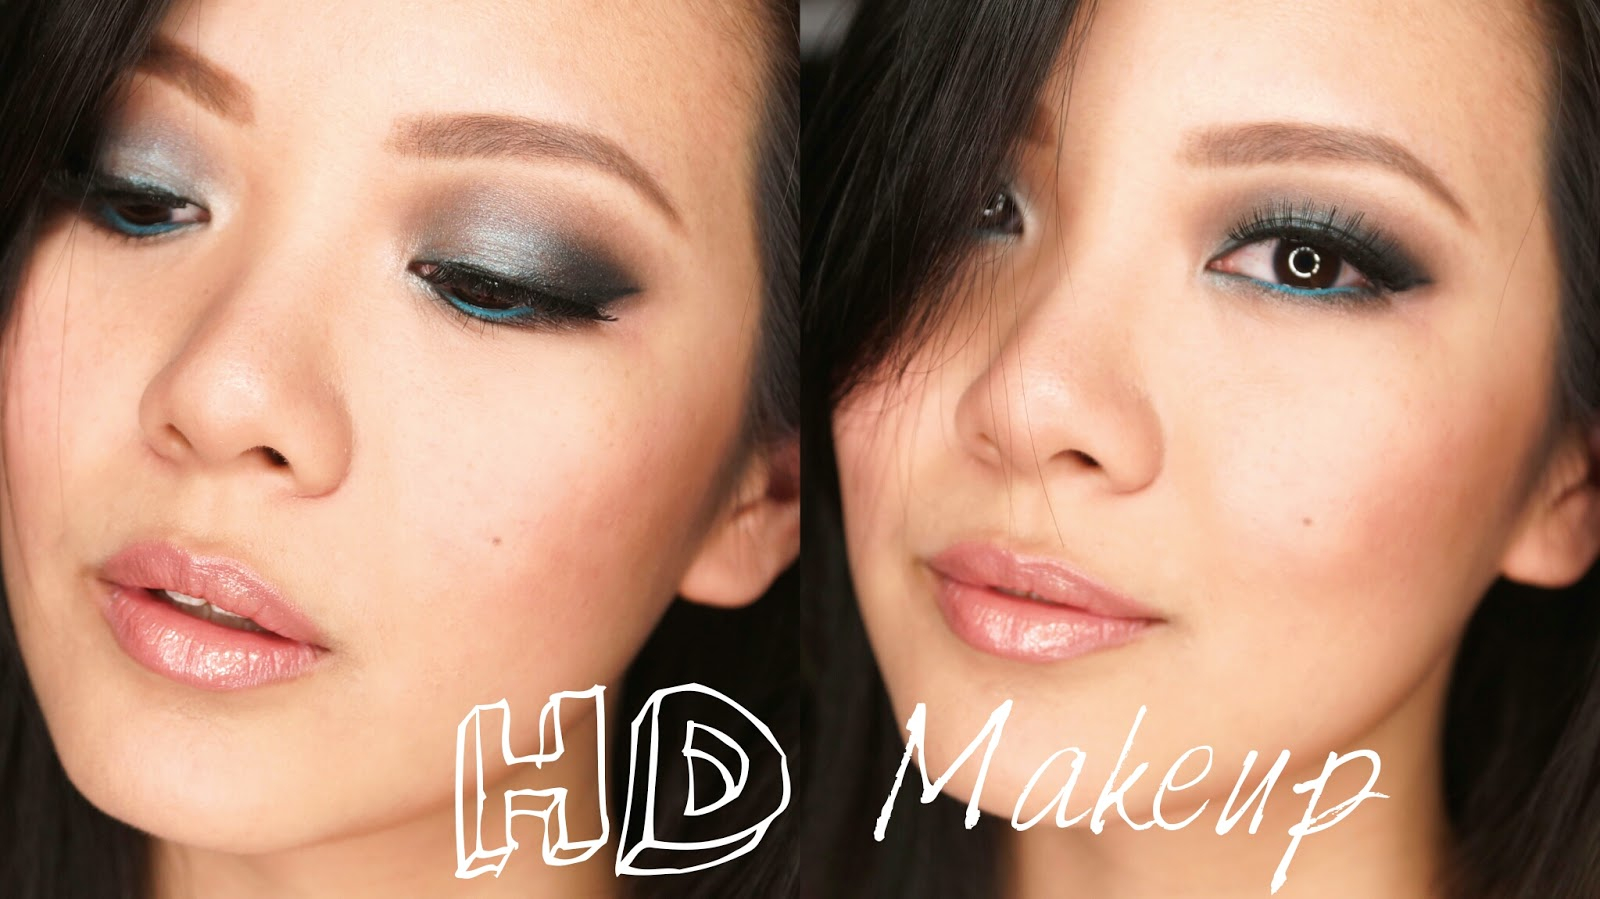 Formal Eye Makeup Makeup Tutorial Photography Friendly Hd Makeup For Prom Formal